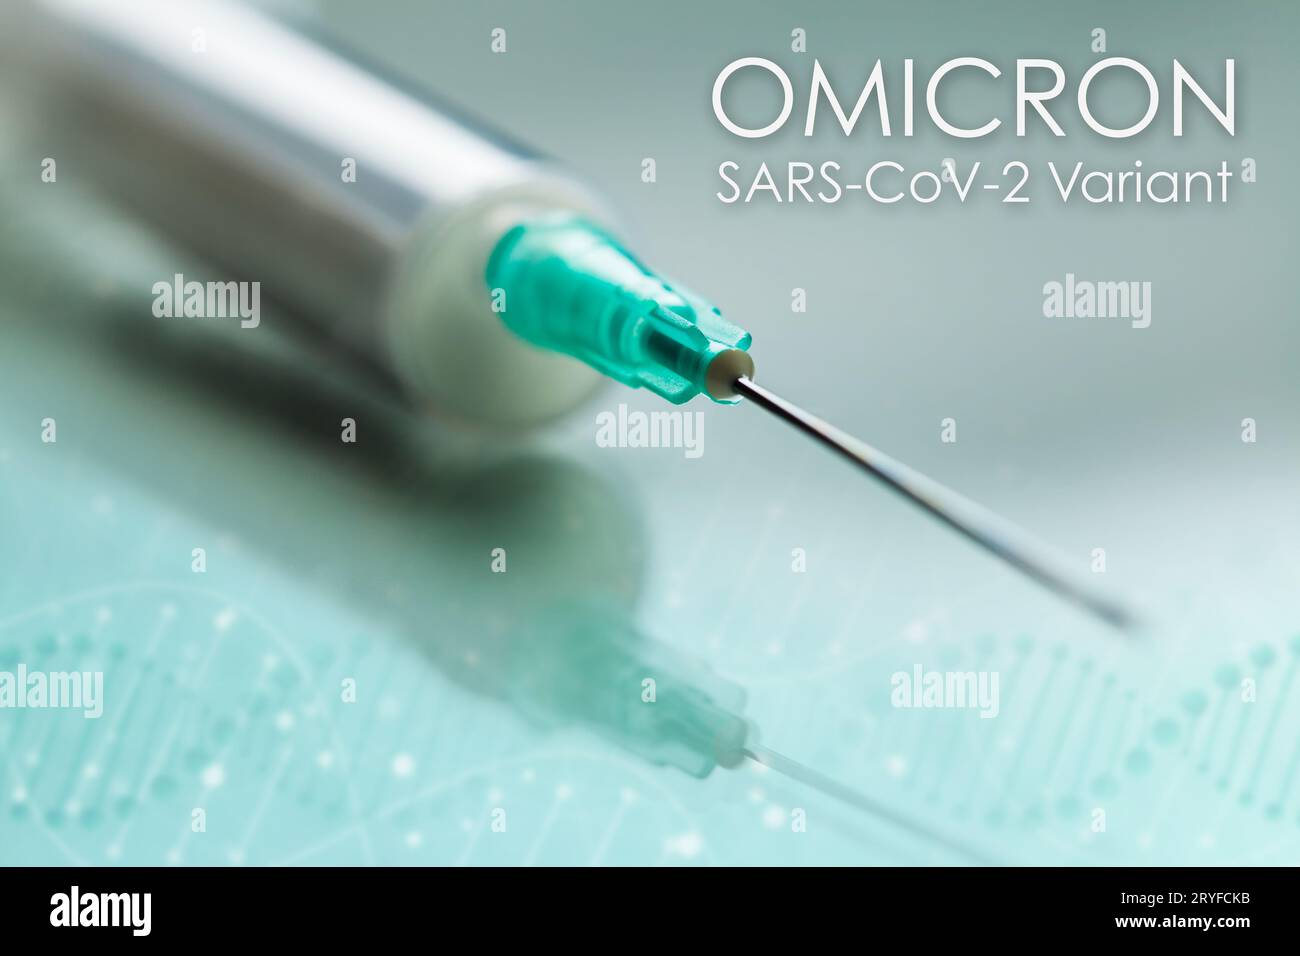 White syringe with green needle on reflective background with text OMICRON SARS-CoV-2 Stock Photo